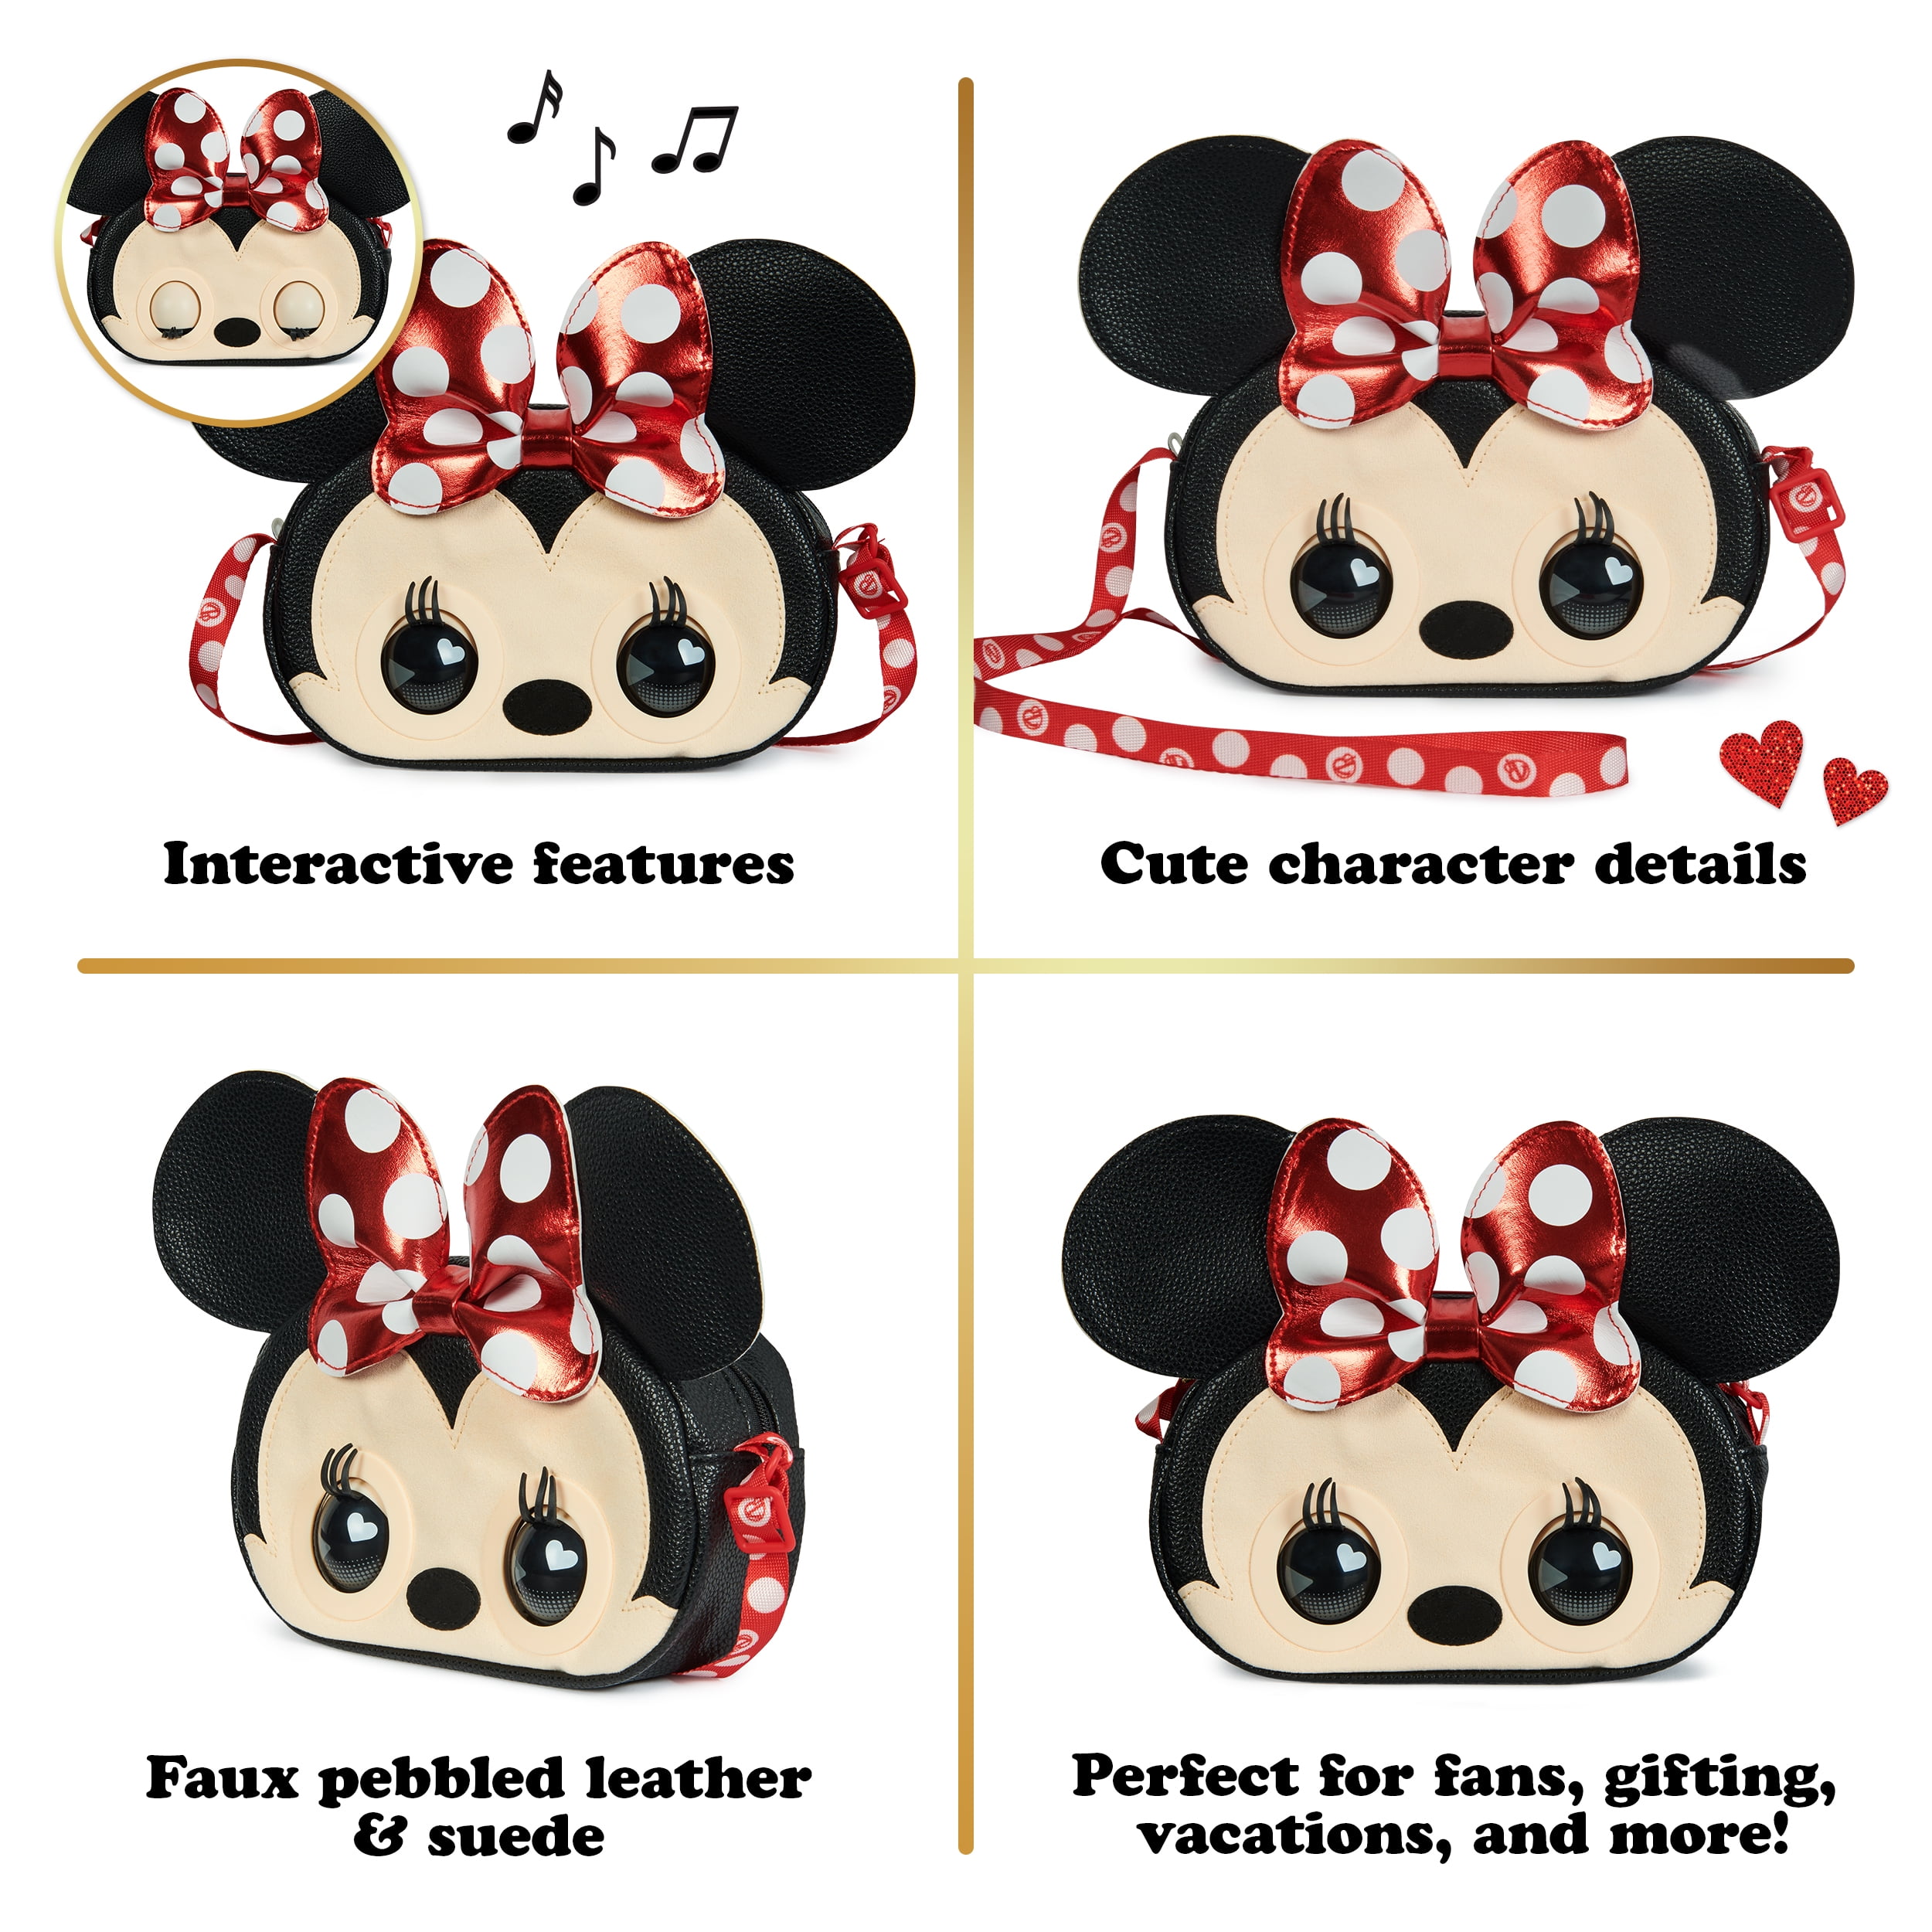  Purse Pets, Disney Minnie Mouse Officially Licensed Interactive  Pet Toy & Kids Purse, 30+ Sounds & Reactions, Girls Crossbody Bag, Trendy  Tween Gifts : Home & Kitchen